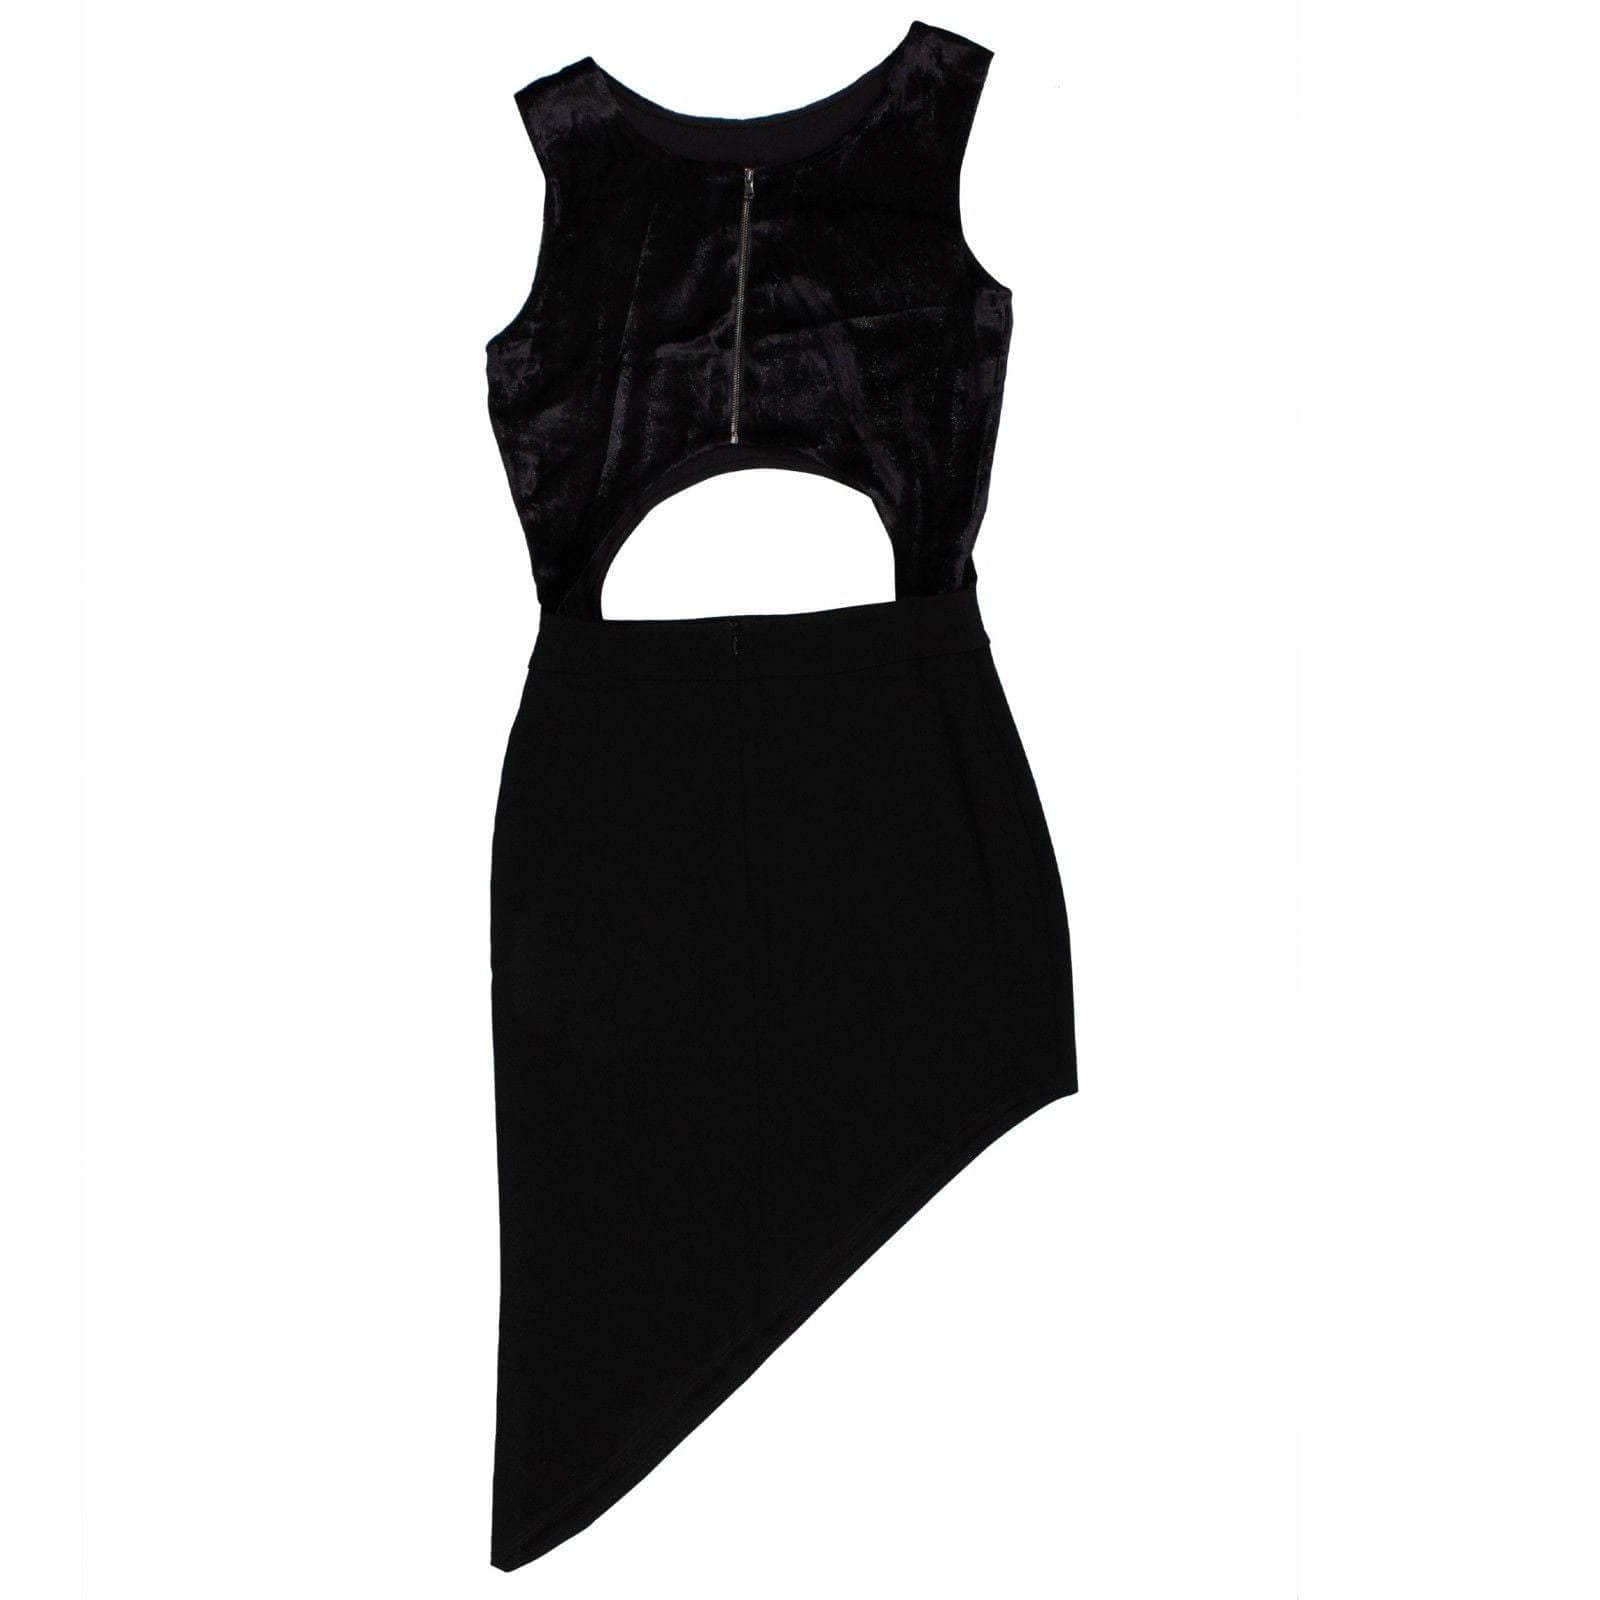 Baja East 250-500, 326WRTW, baja-east, couponcollection, dresses, gender-womens, main-clothing, size-xs XS Galaxy Cut Out Dress - Black 58LE-1611/1 58LE-1611/1